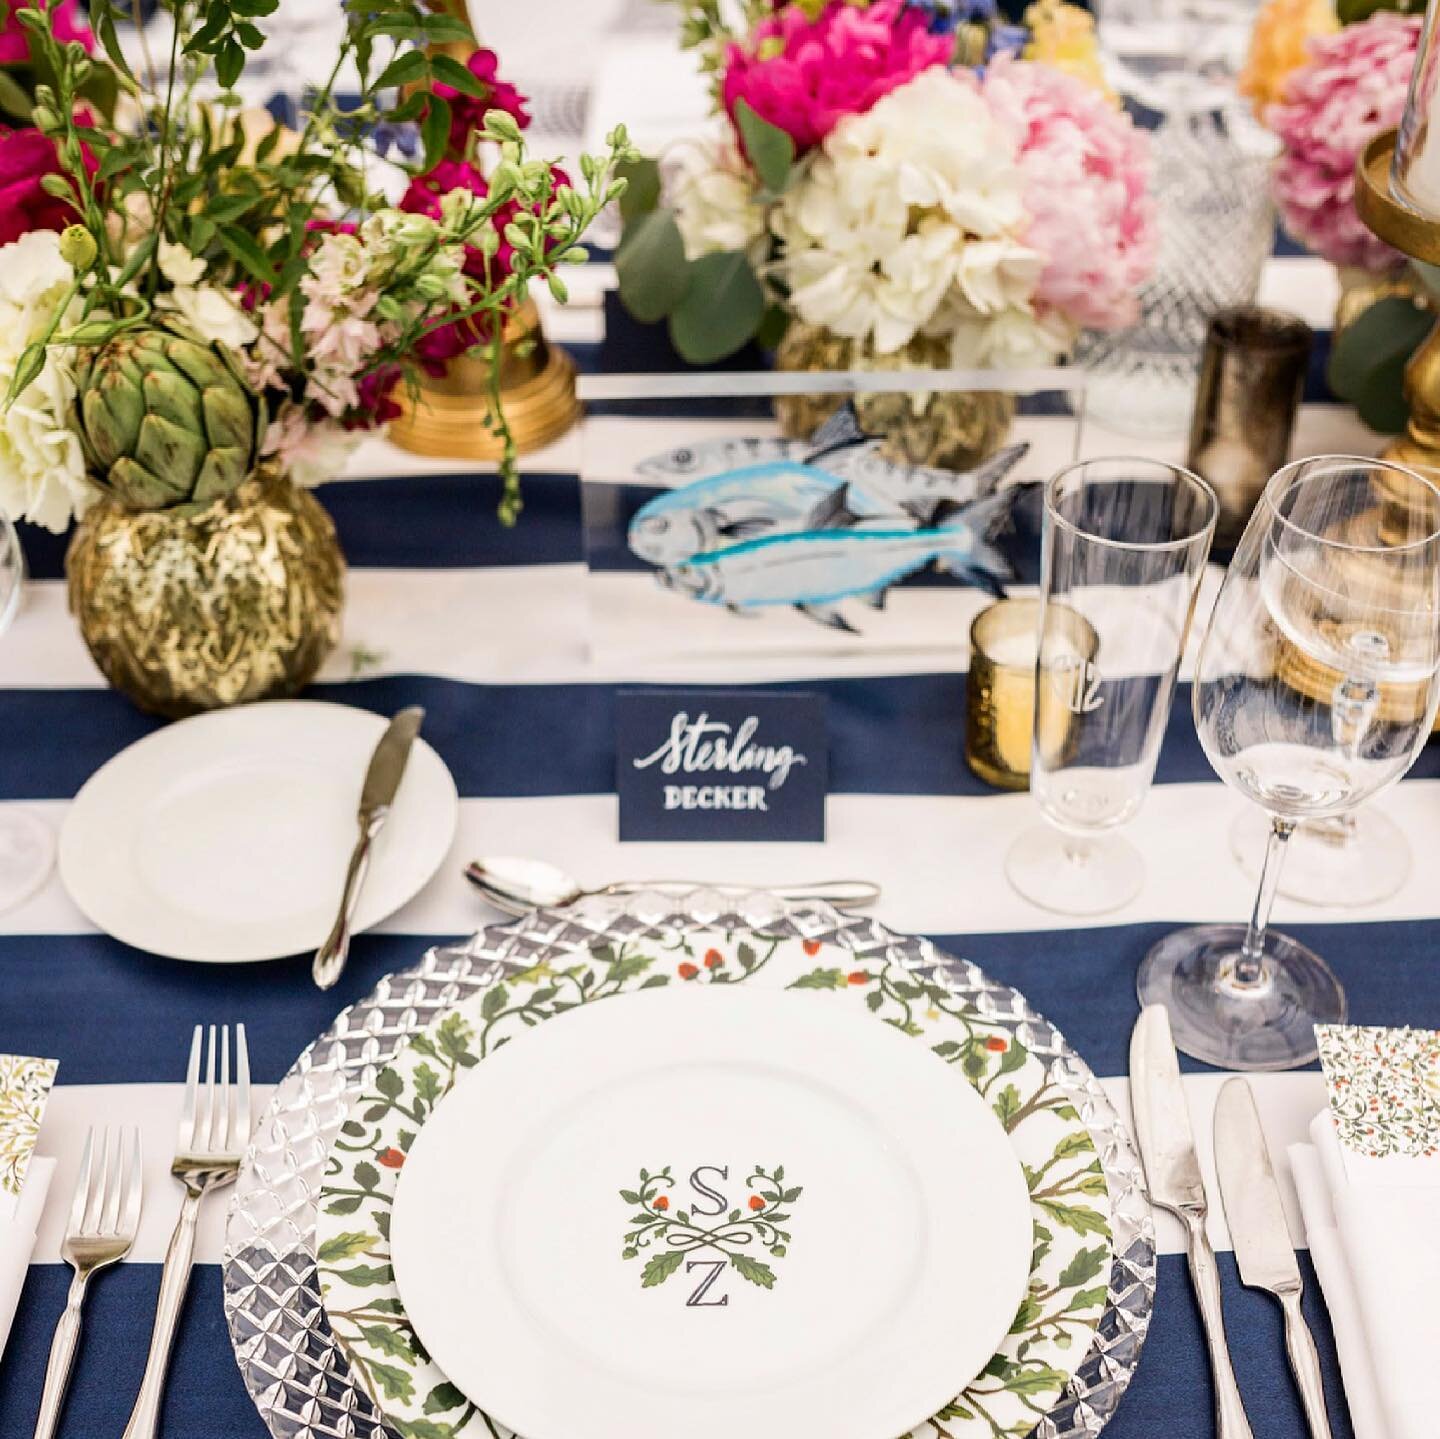 All in the details! 
🍓💕🌳🌿🐟🍾
.
Plates with their oak and strawberry pattern.  Summer tent with bright colorful floral.. incredible sugar flowers adorn their cake! 
.
#weddinginspo #weddingdetails #weddingdecor #summerwedding #weddingday #ejddesi